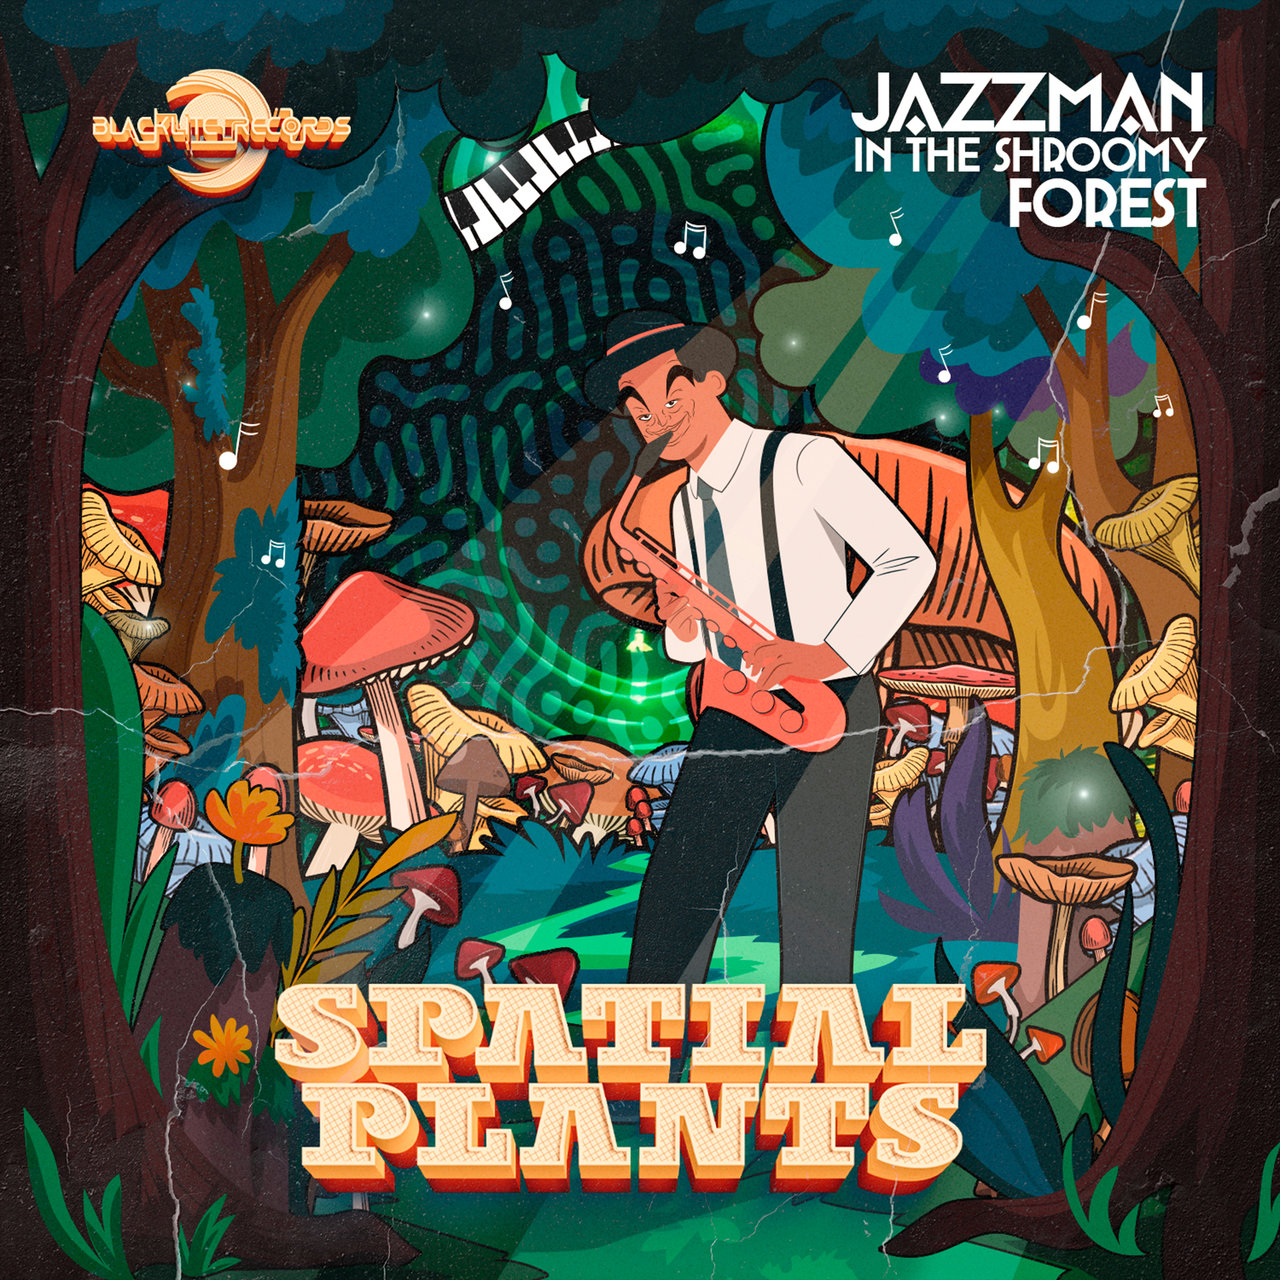 Jazzman in the Shroomy Forest - Spatial Plants